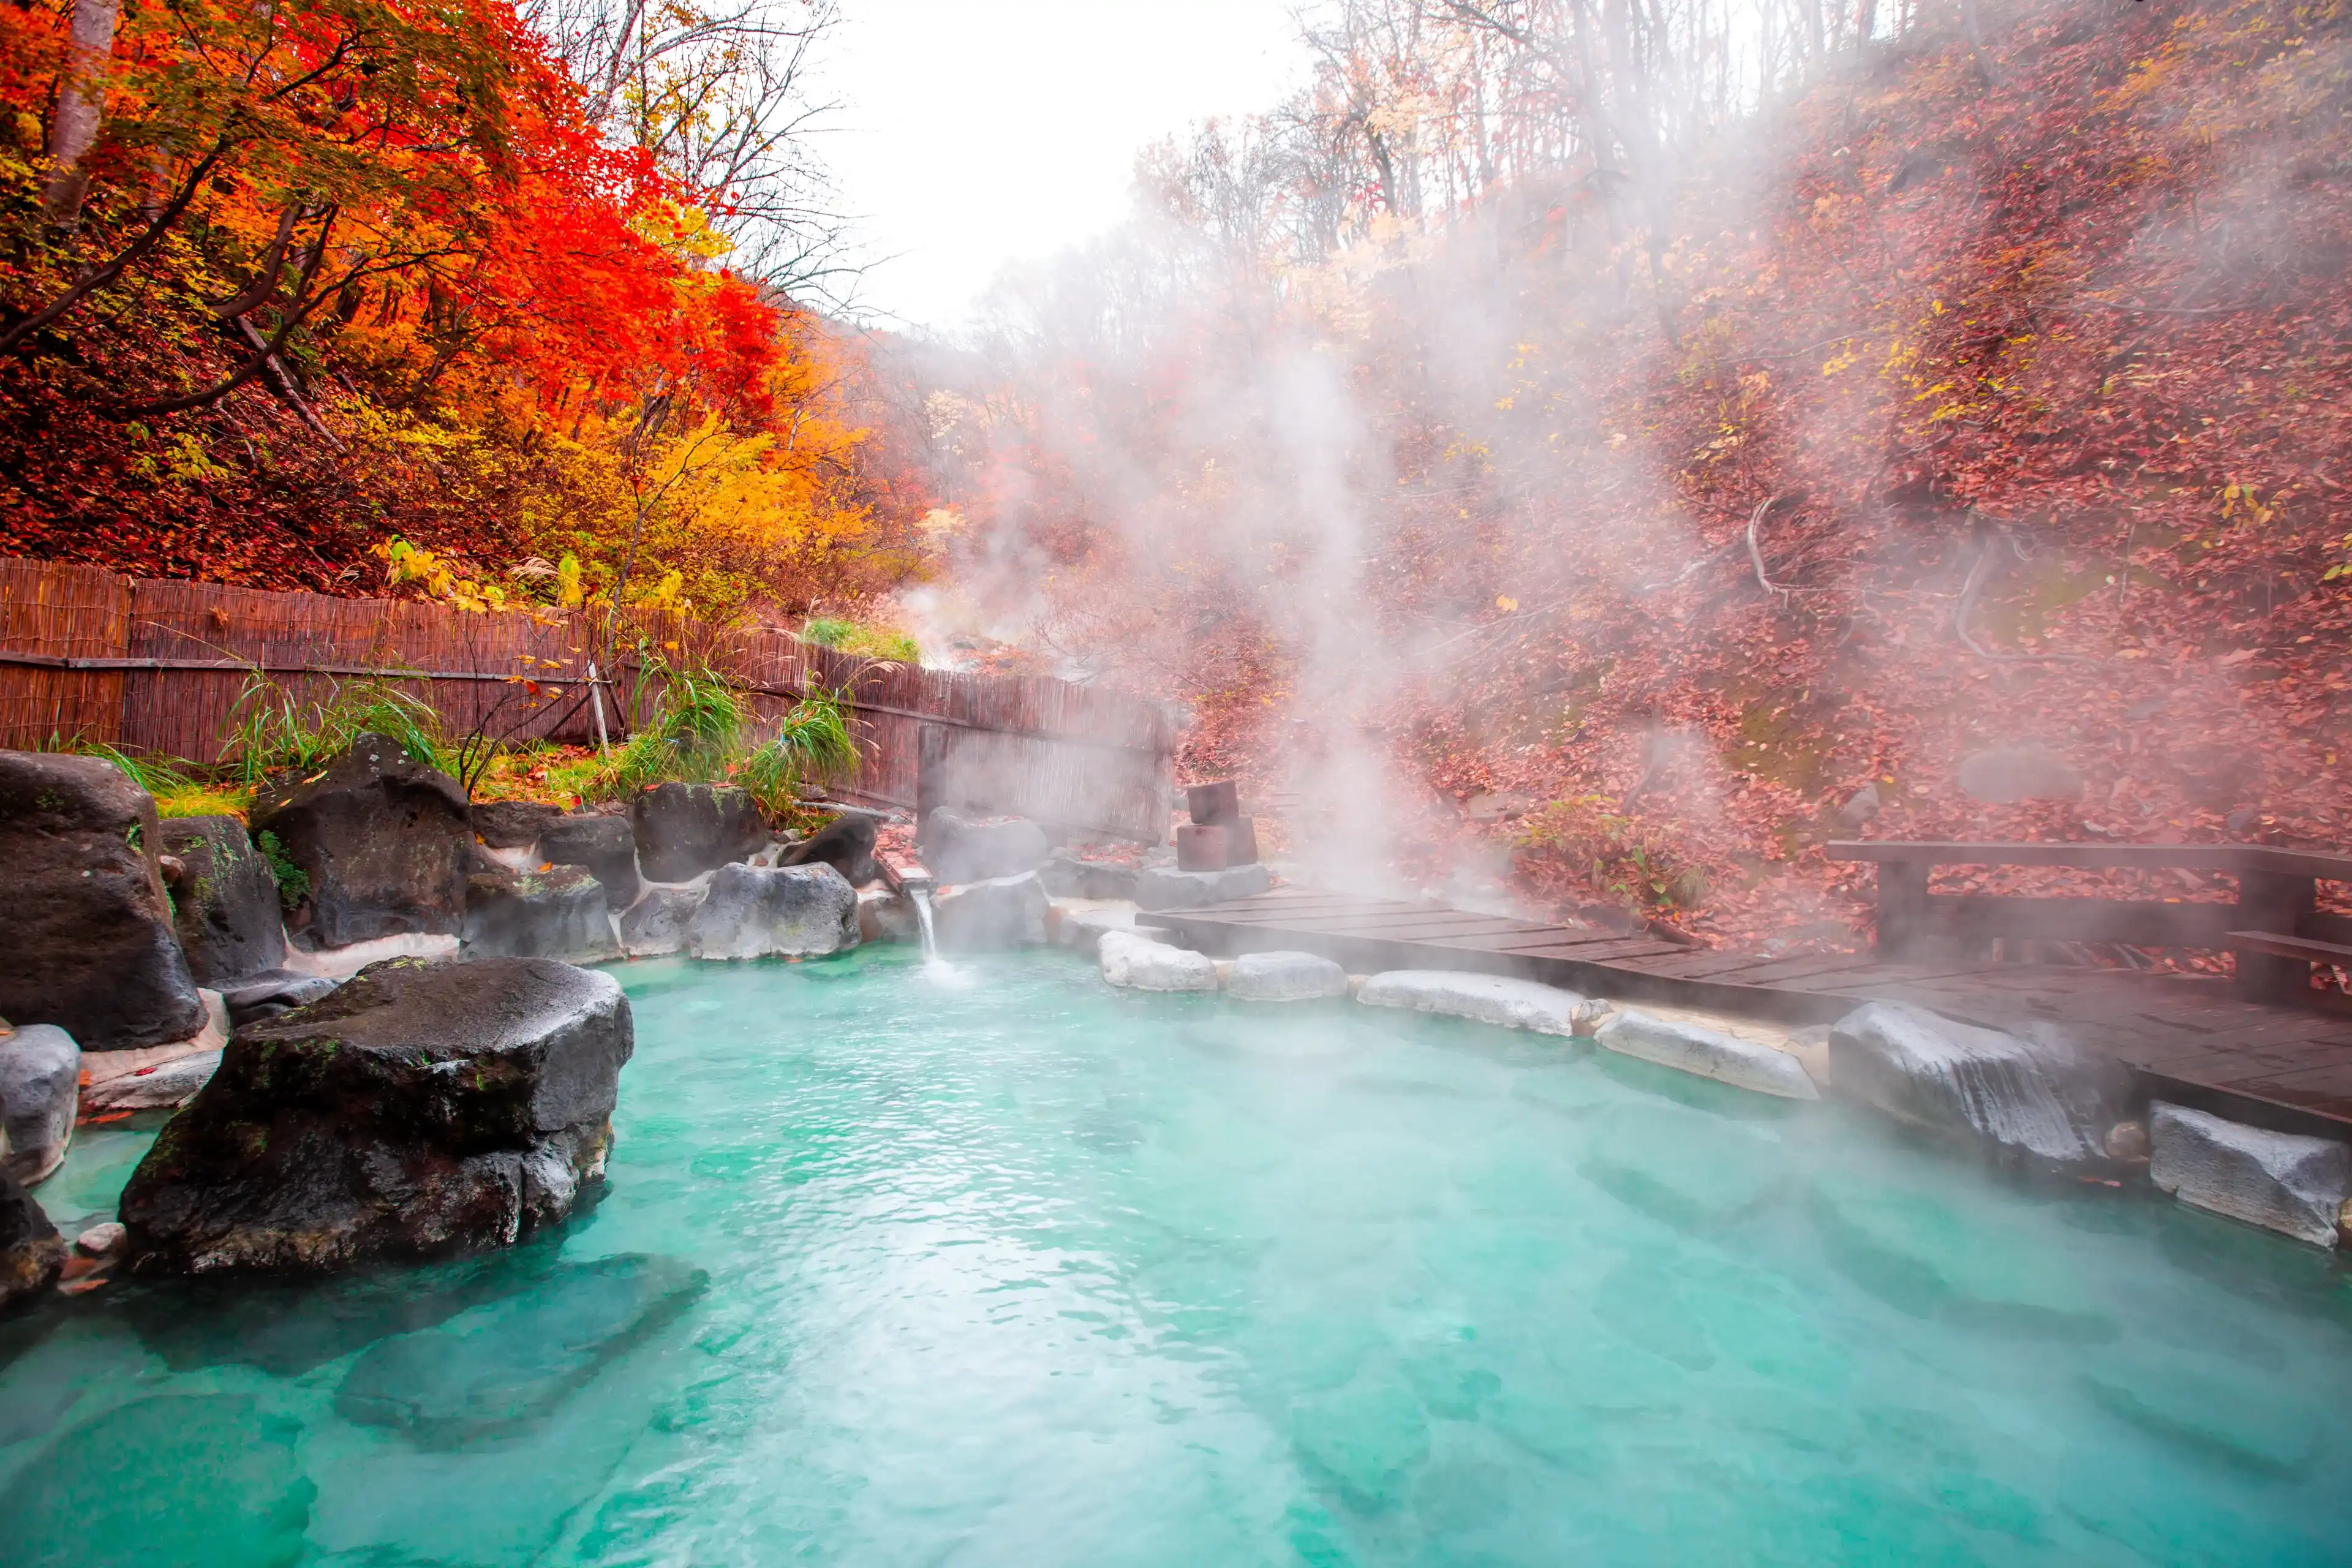 Japanese Hot Springs Onsen Natural Bath Surrounded by red-yellow leaves. In fall leaves fall in Yamagata. Japan.